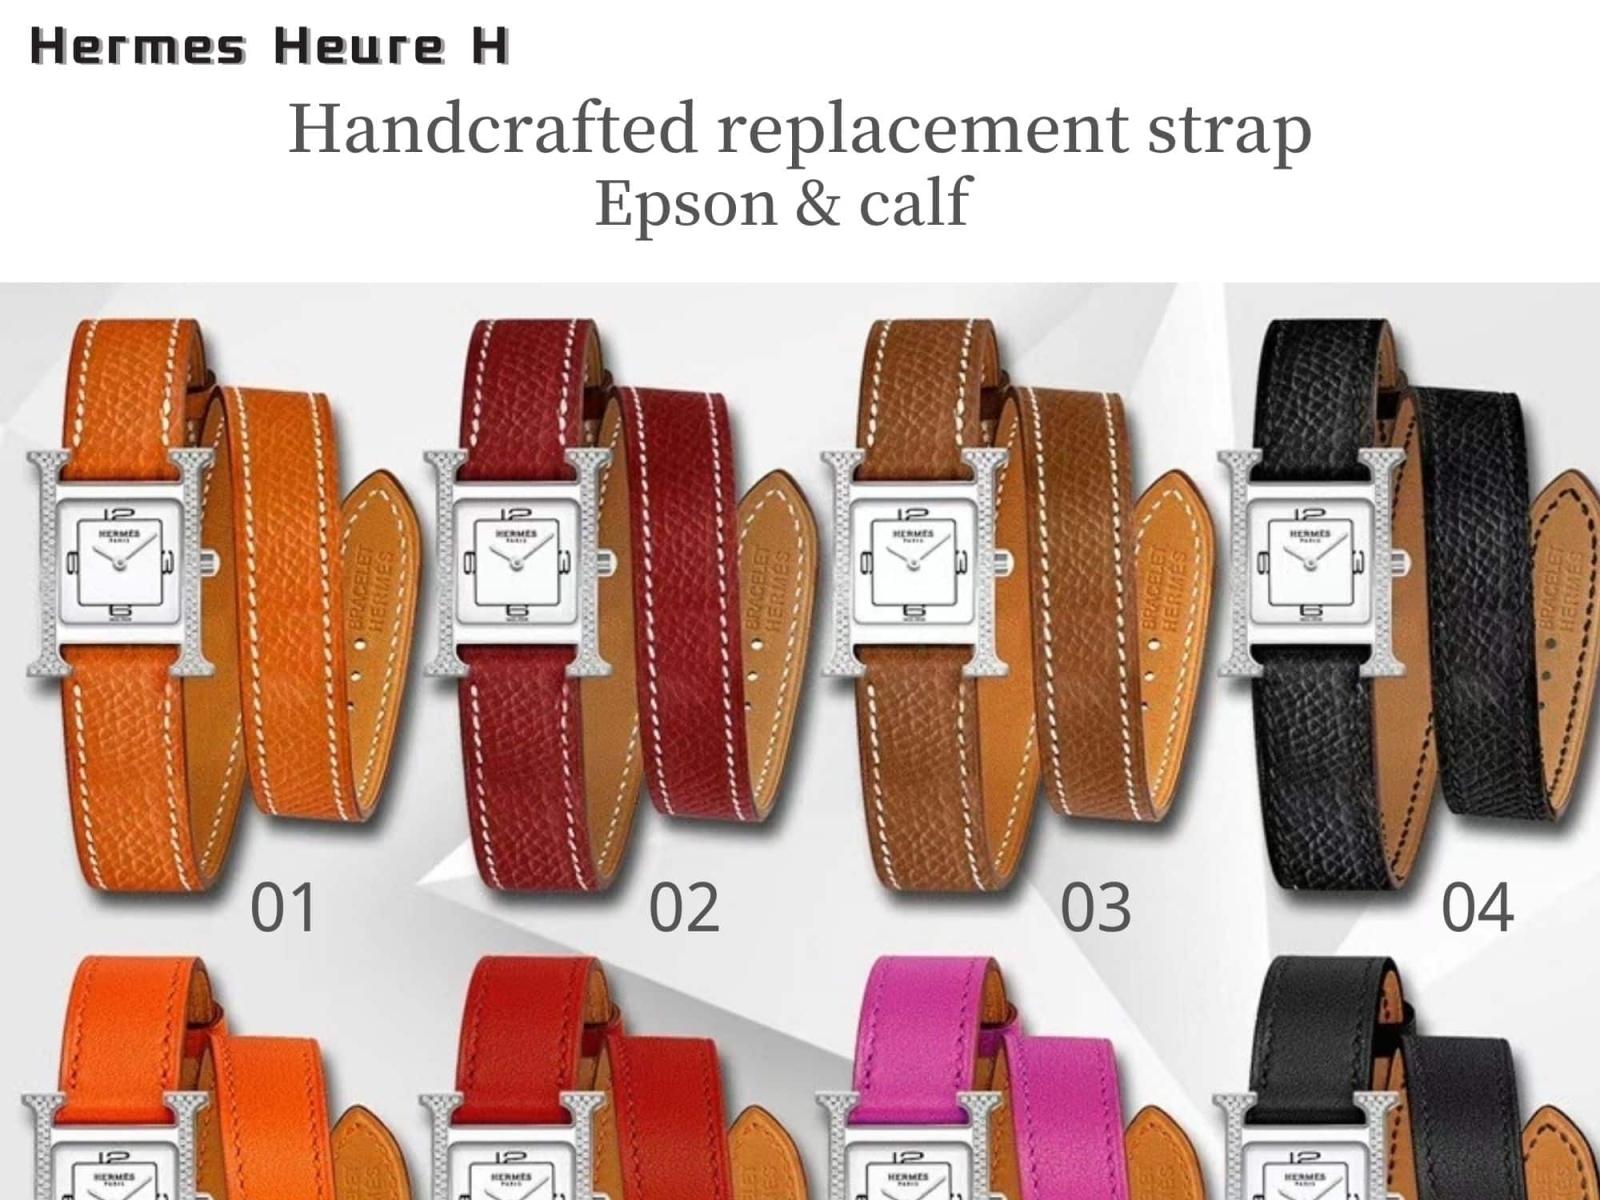 Rolex velcro strap 20mm replacement watch bands - Drwatchstrap